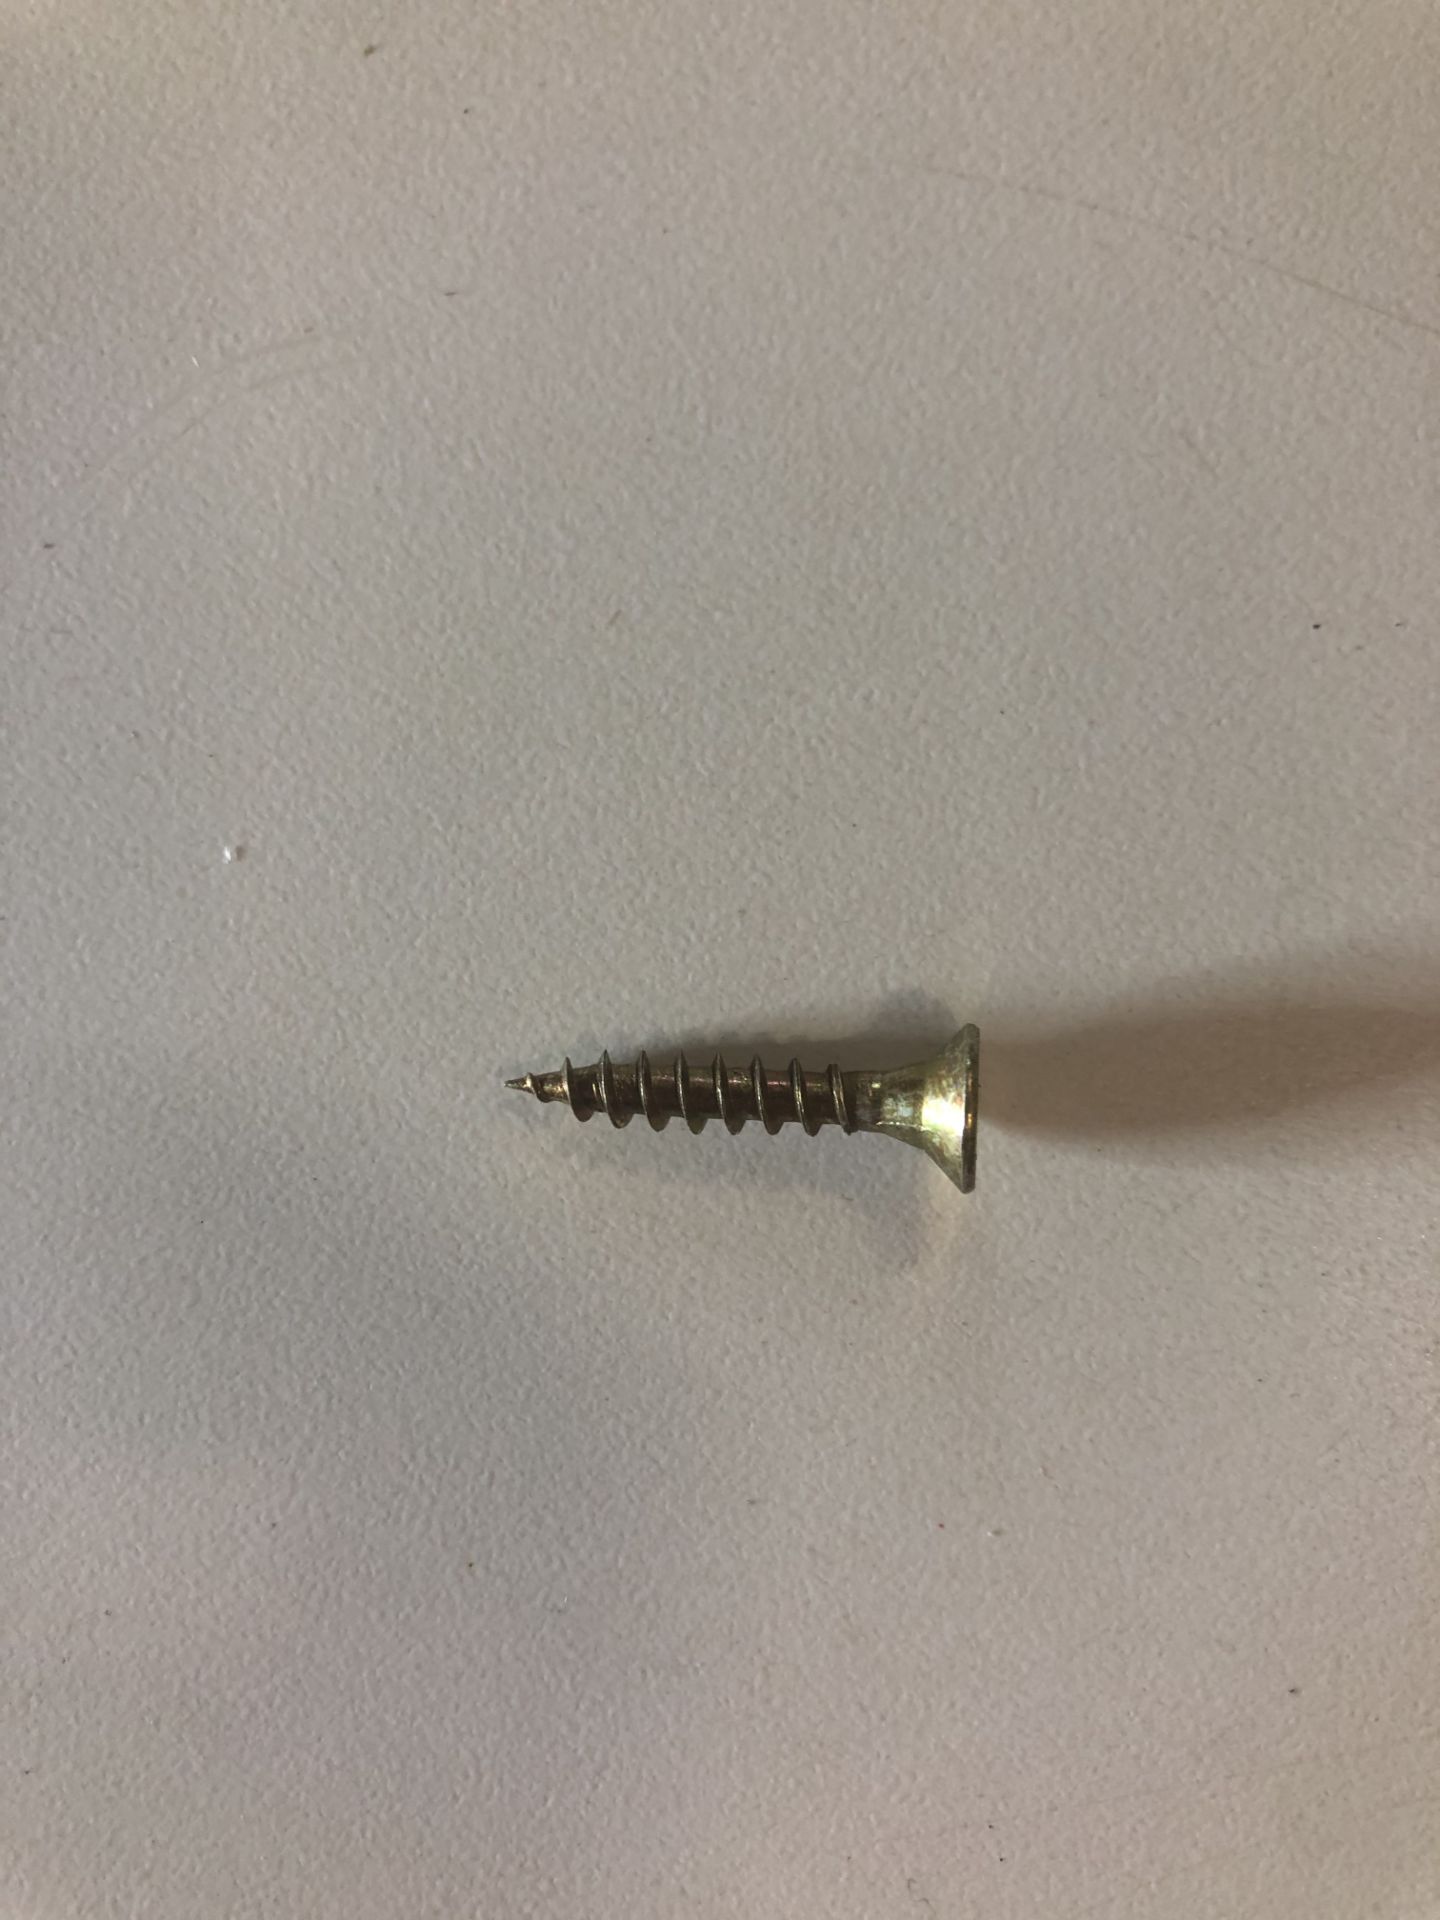 22 x Boxes of Chipboard Screws, 4.5 x 25mm ( Boxes Of Approx 200) - Image 3 of 3